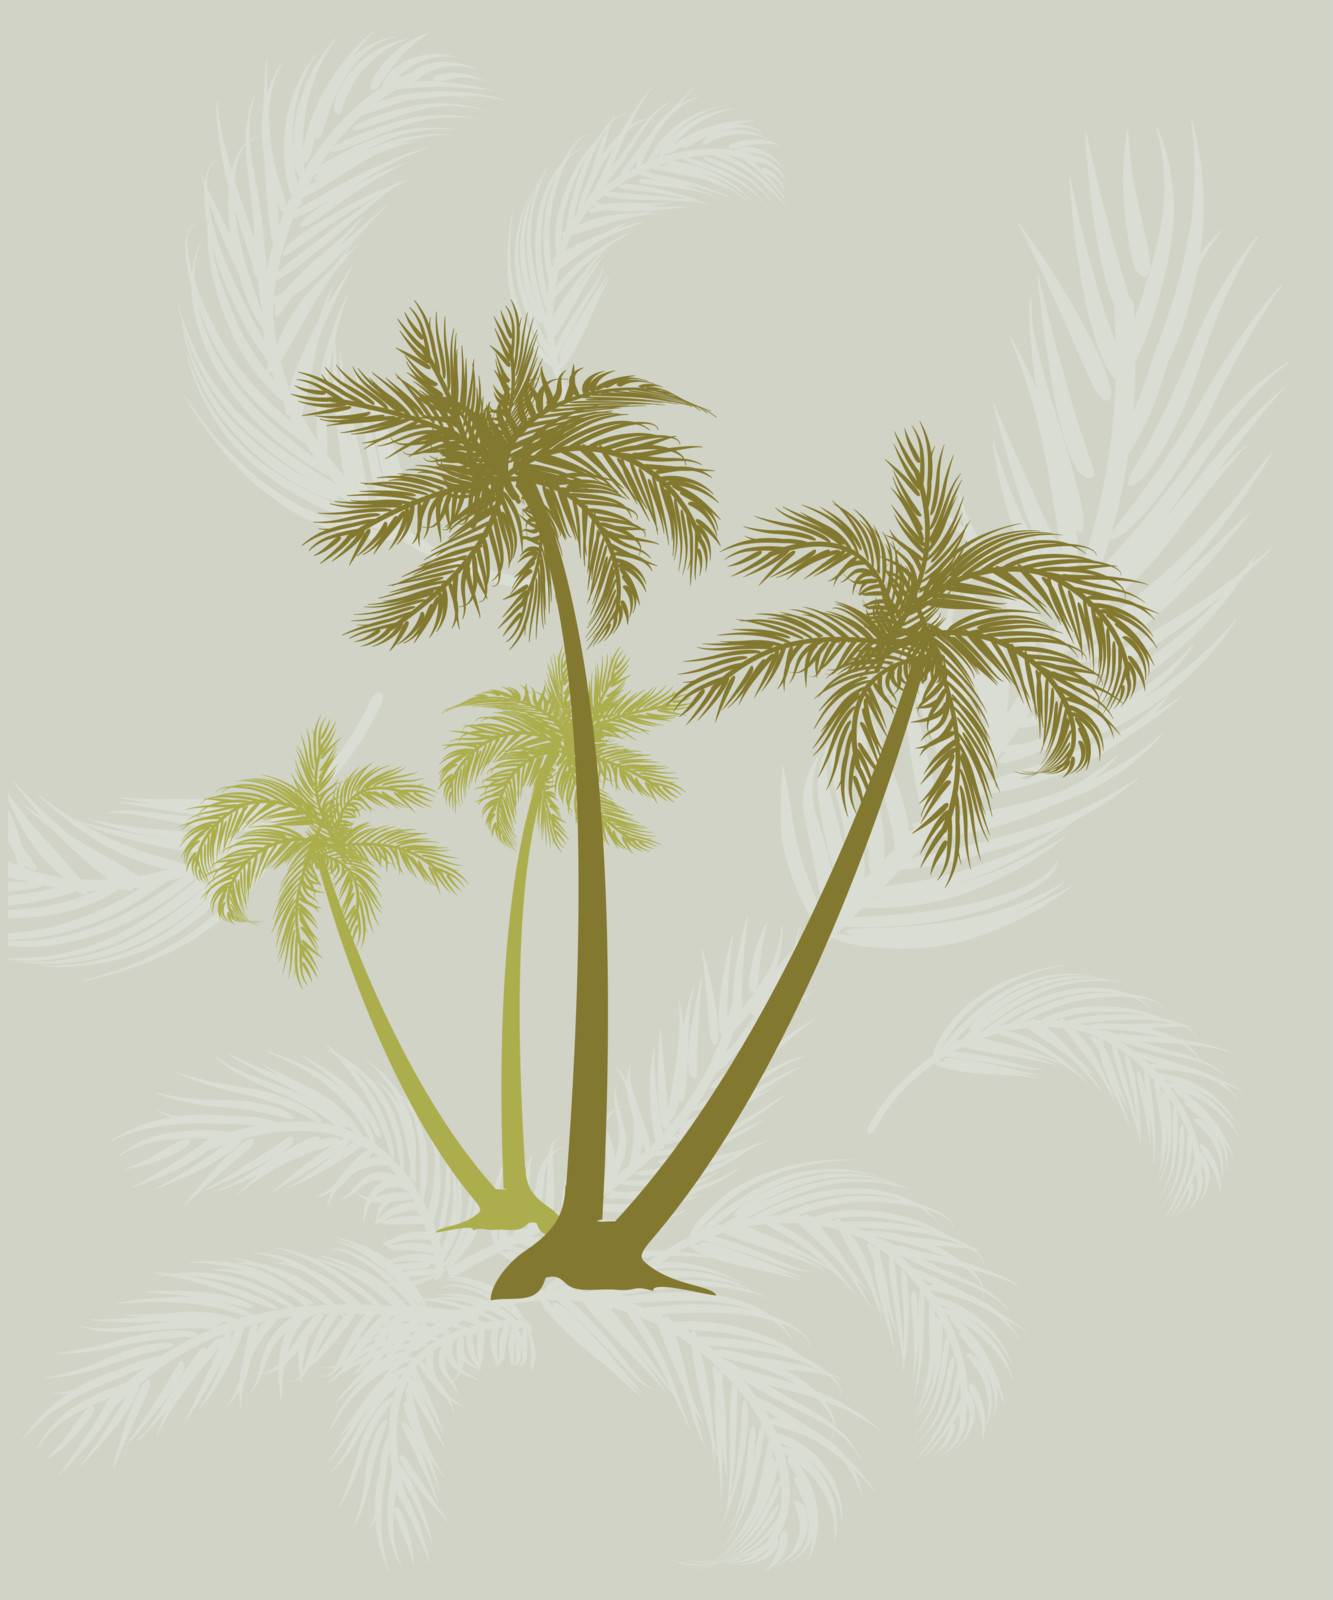 Palm trees by mcherevan